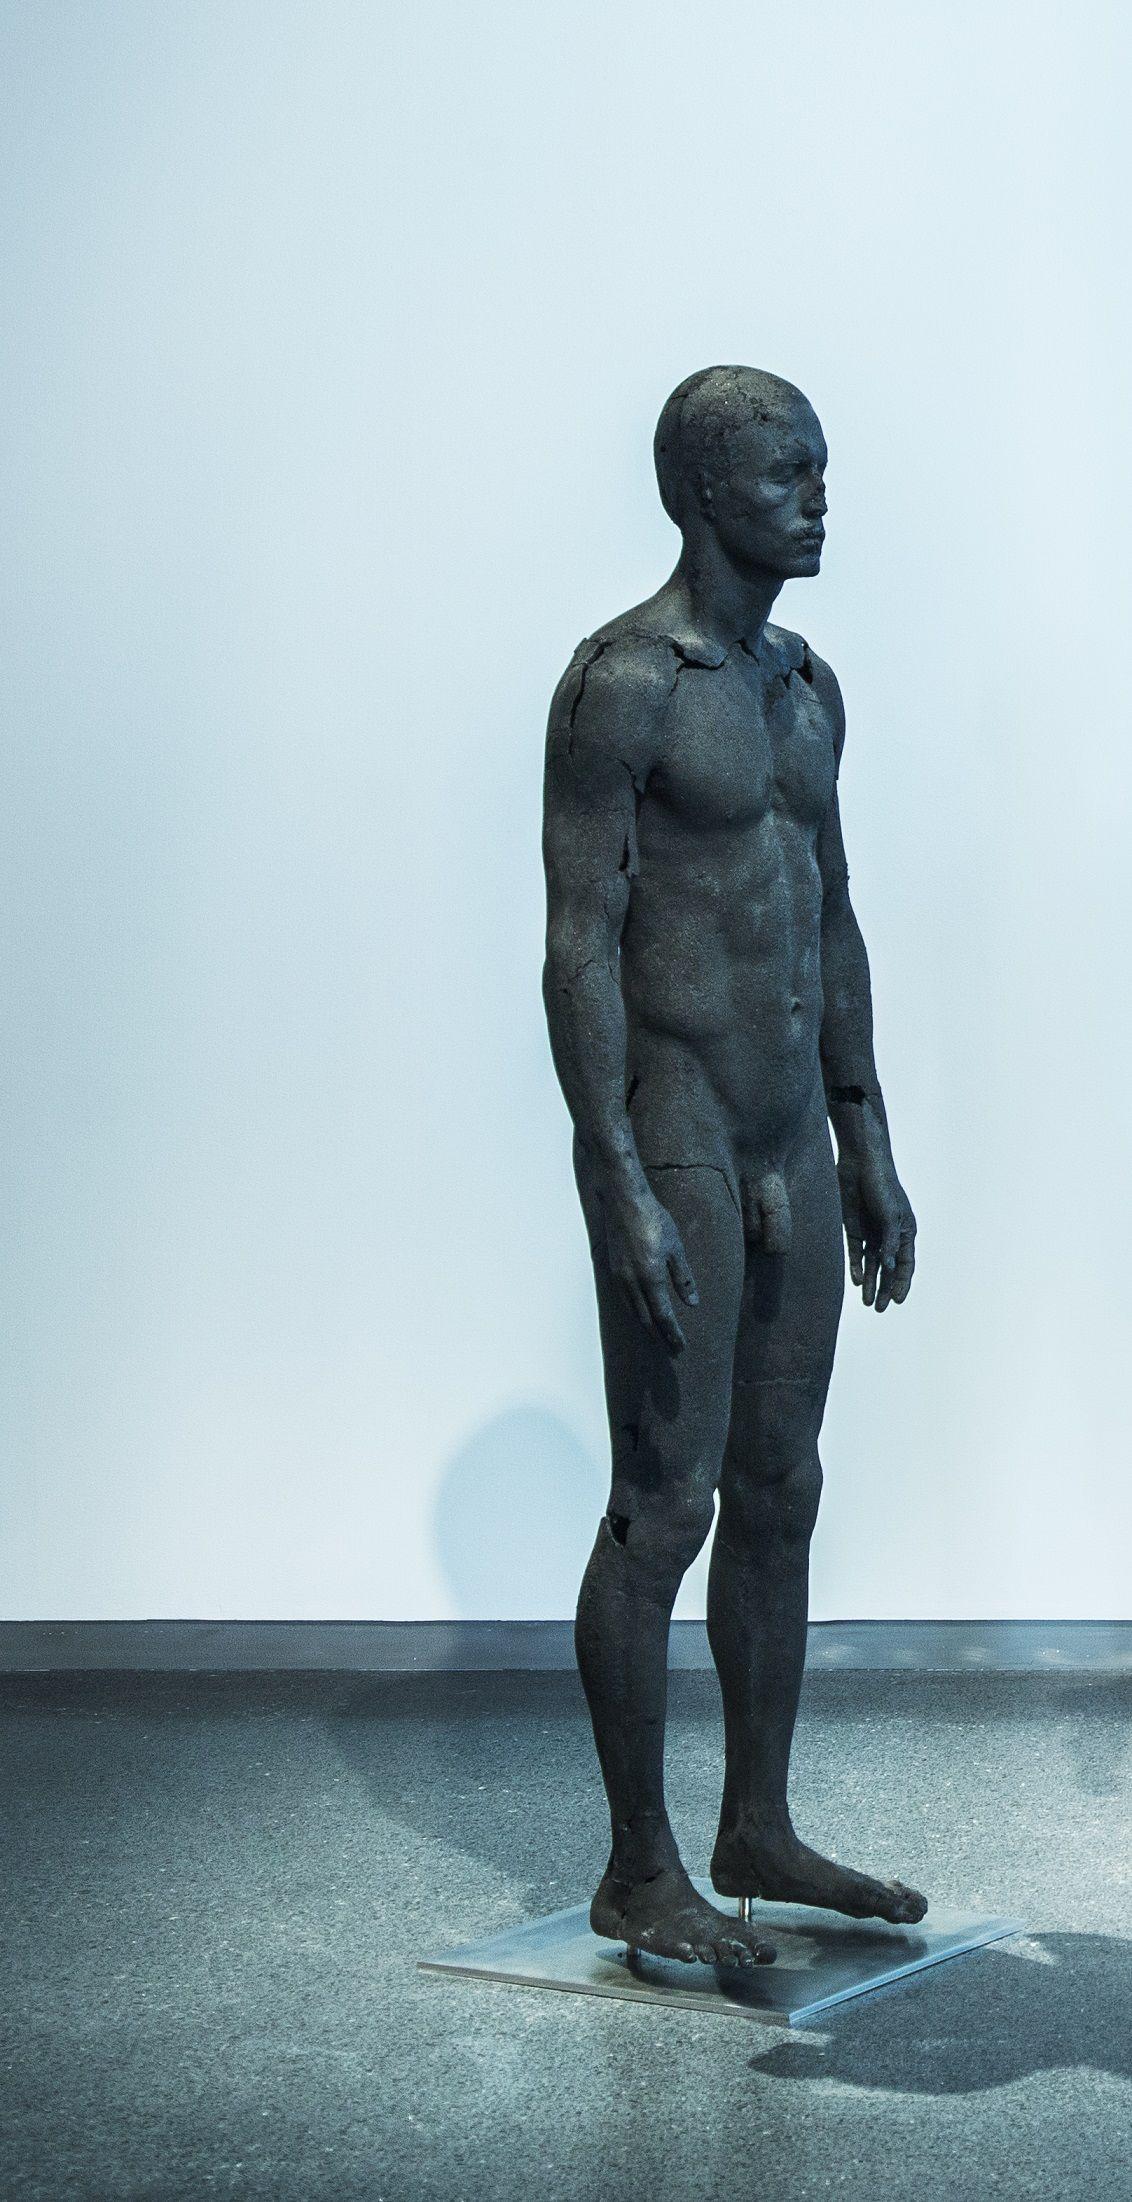 The Presence of Absence – Male (I) is a unique coal, stainless steel and epoxy resin sculpture by contemporary artist Tom Price, dimensions are 183 × 50 × 50 cm (72 × 19.7 × 19.7 in). 
The sculpture is signed and comes with a certificate of